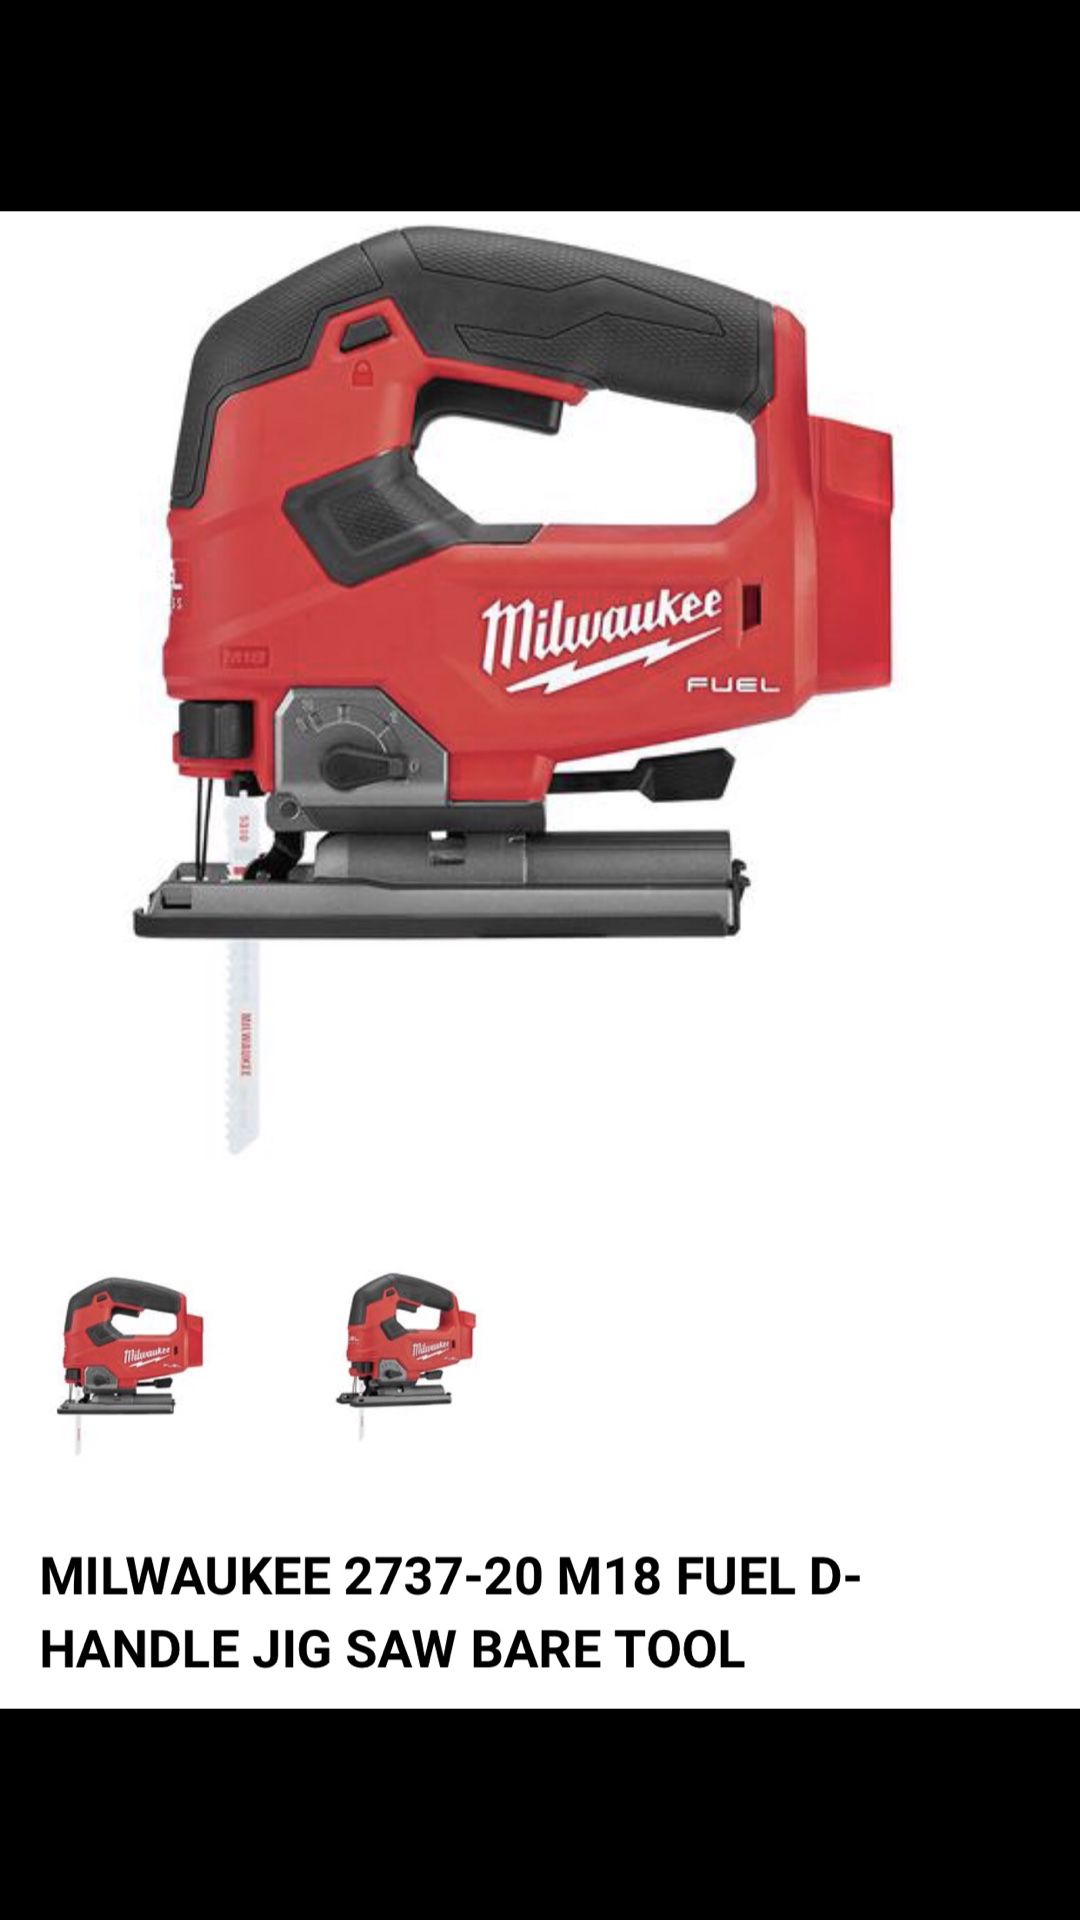 MILWAUKEE 2737-20 M18 FUEL D-HANDLE JIG SAW BARE TOOL for Sale in San Jose,  CA OfferUp